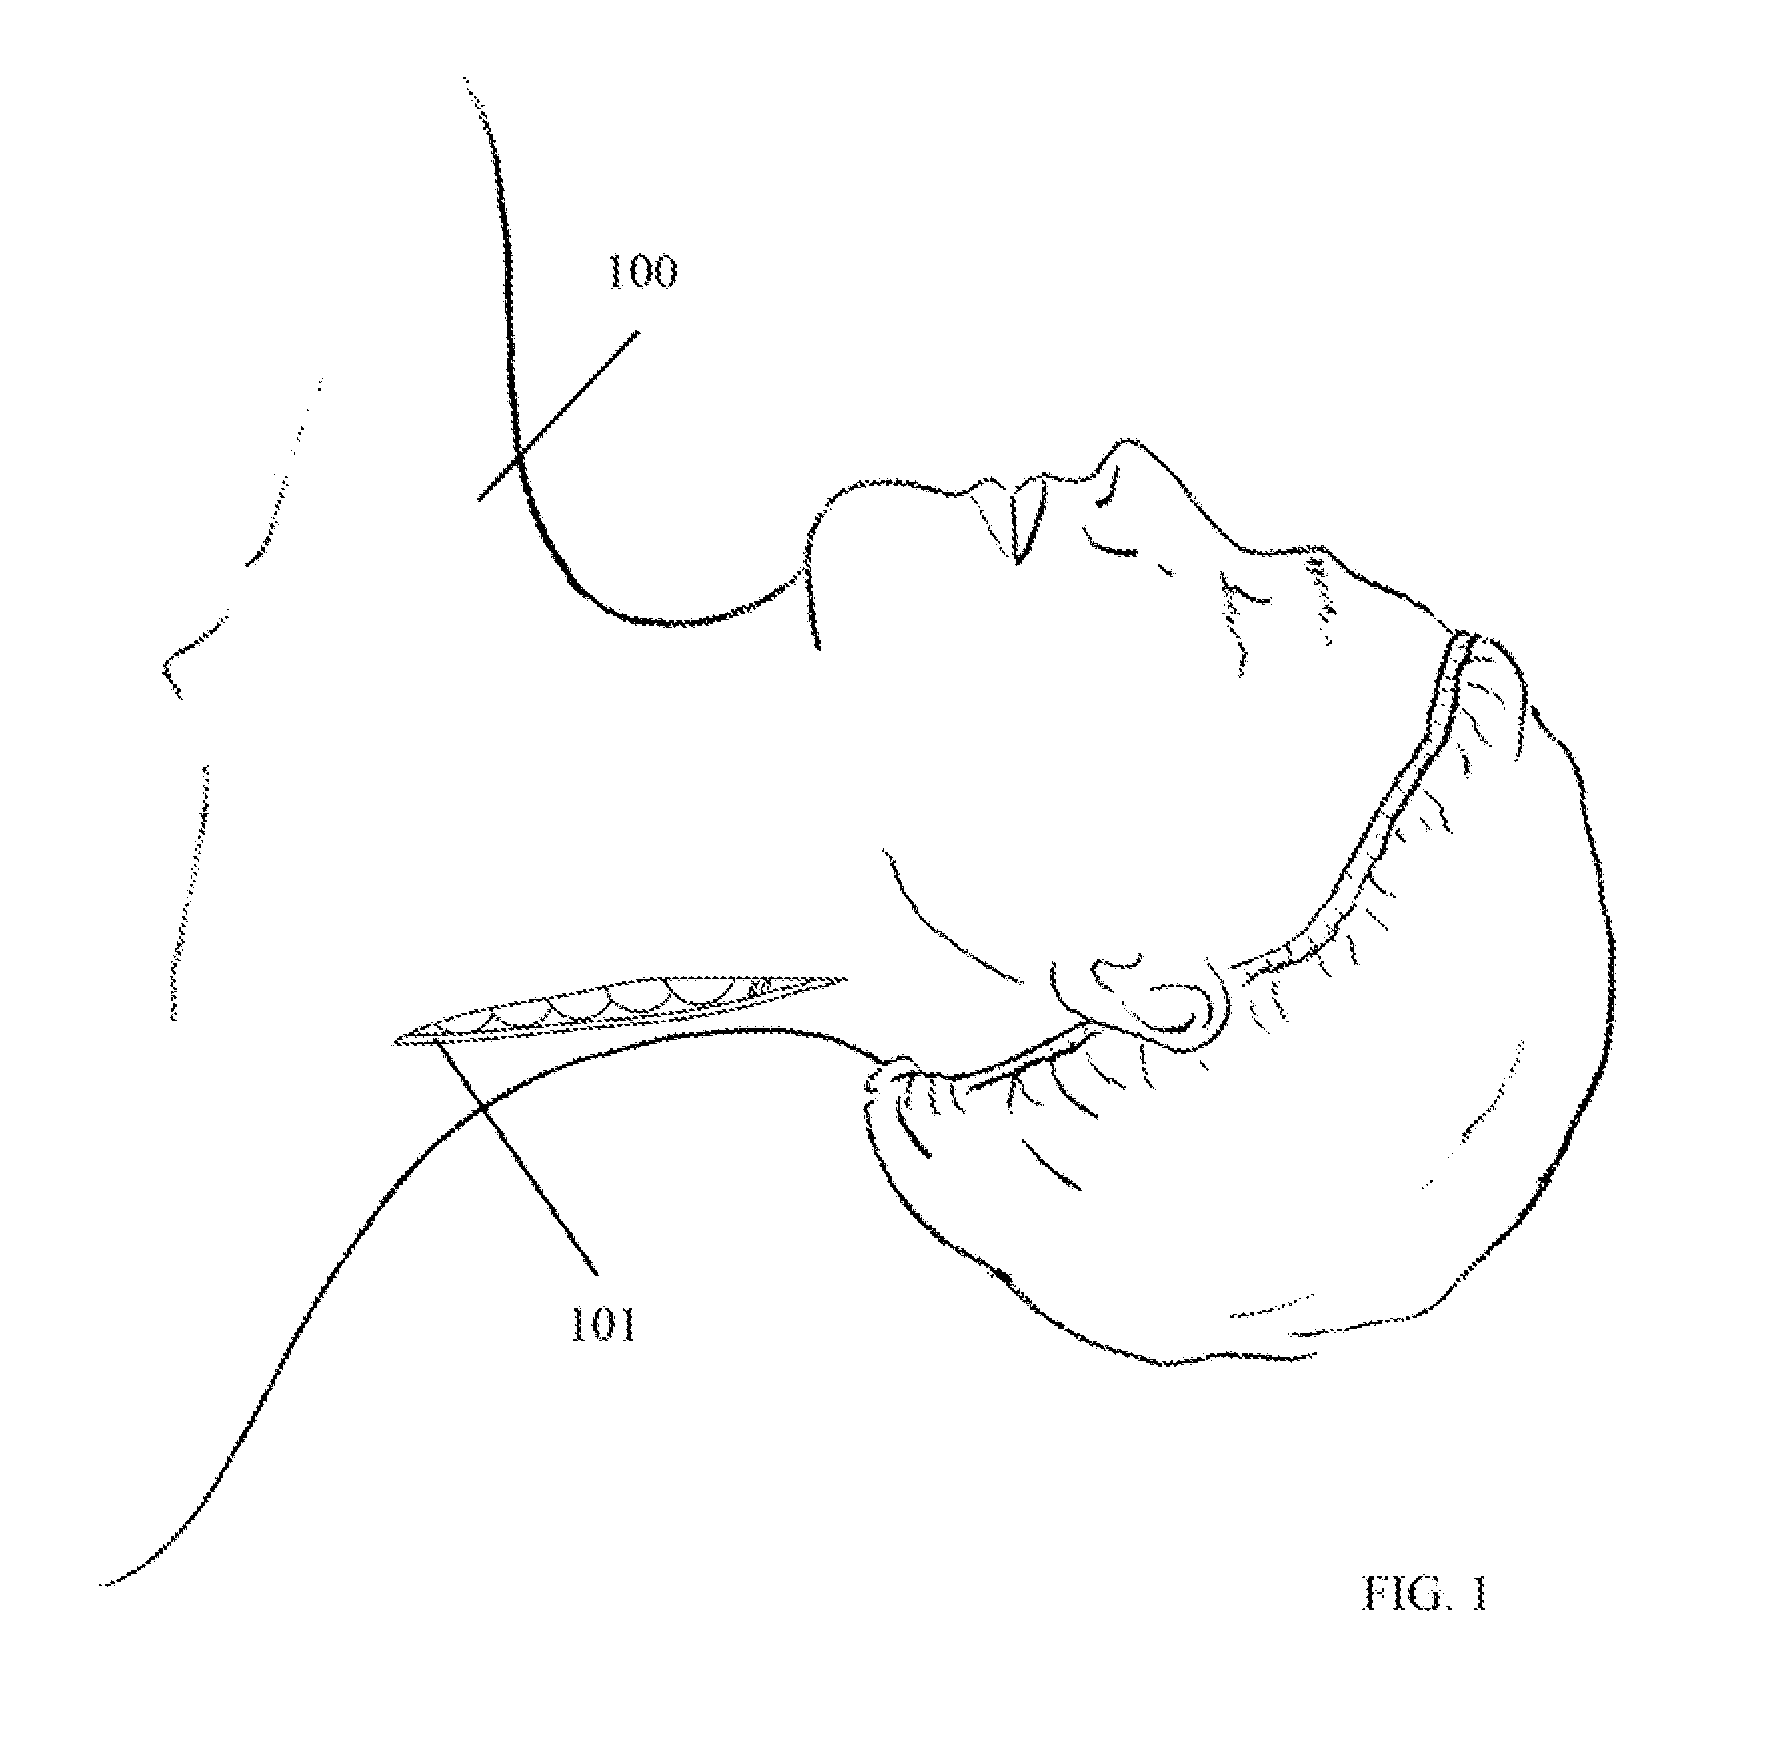 Method of lateral facet approach, decompression and fusion using screws and staples as well as arthroplasty